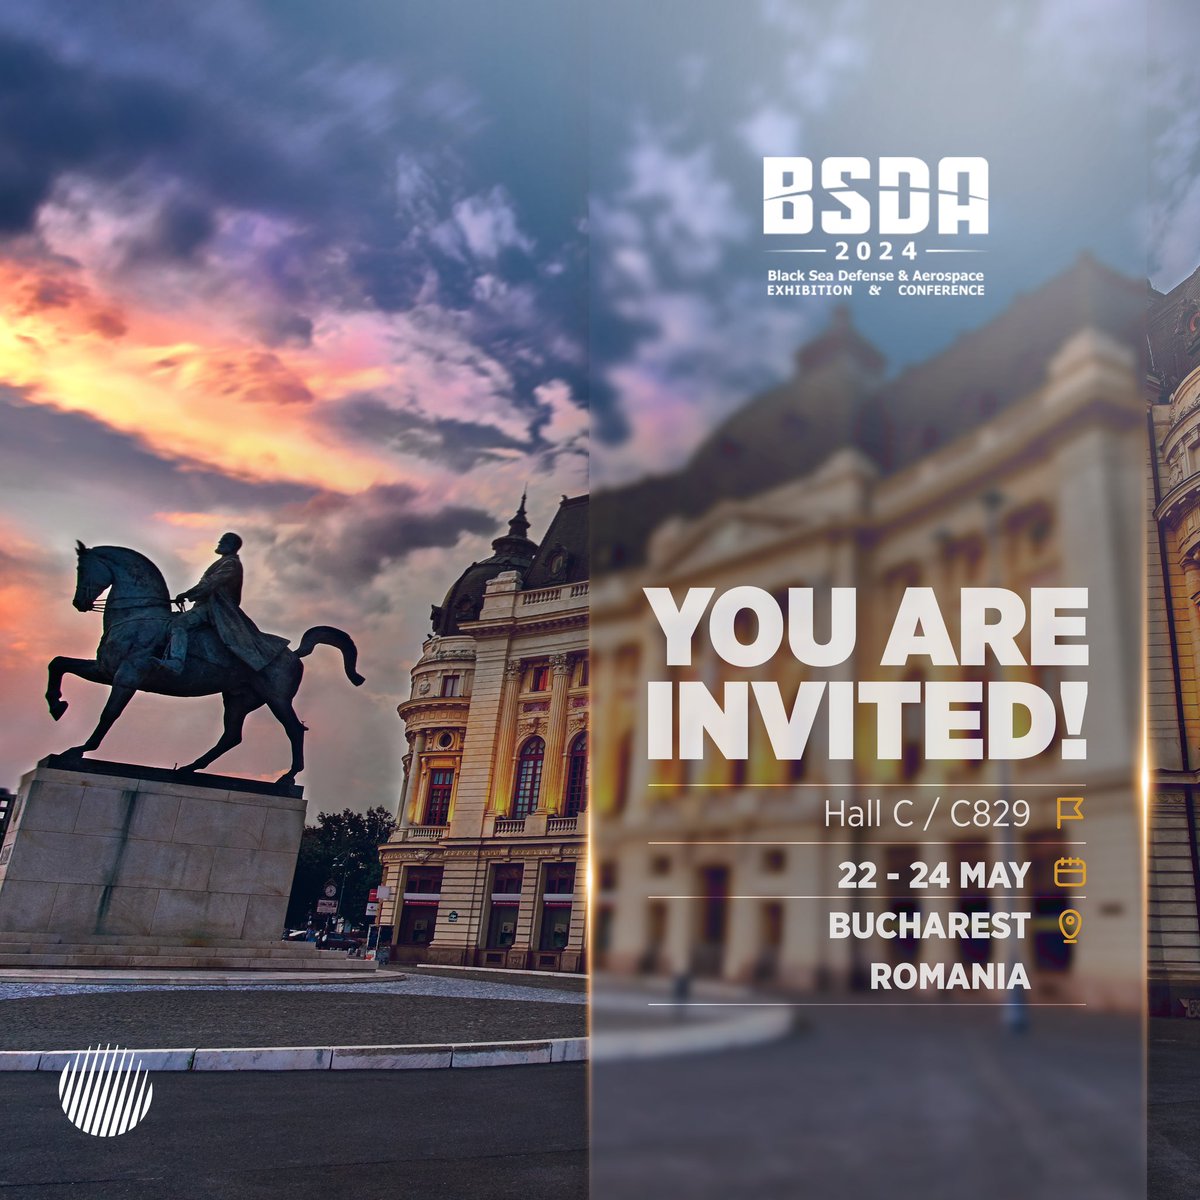 You are invited! Visit us and discover our pioneering defense solutions at our booth at @bsdaromania. 📍Hall C / C829 🗓 22-24 May 🧭 Bucharest, Romania #BSDA2024 🇹🇷🤝🇷🇴 #RiseForTomorrow #Roketsan